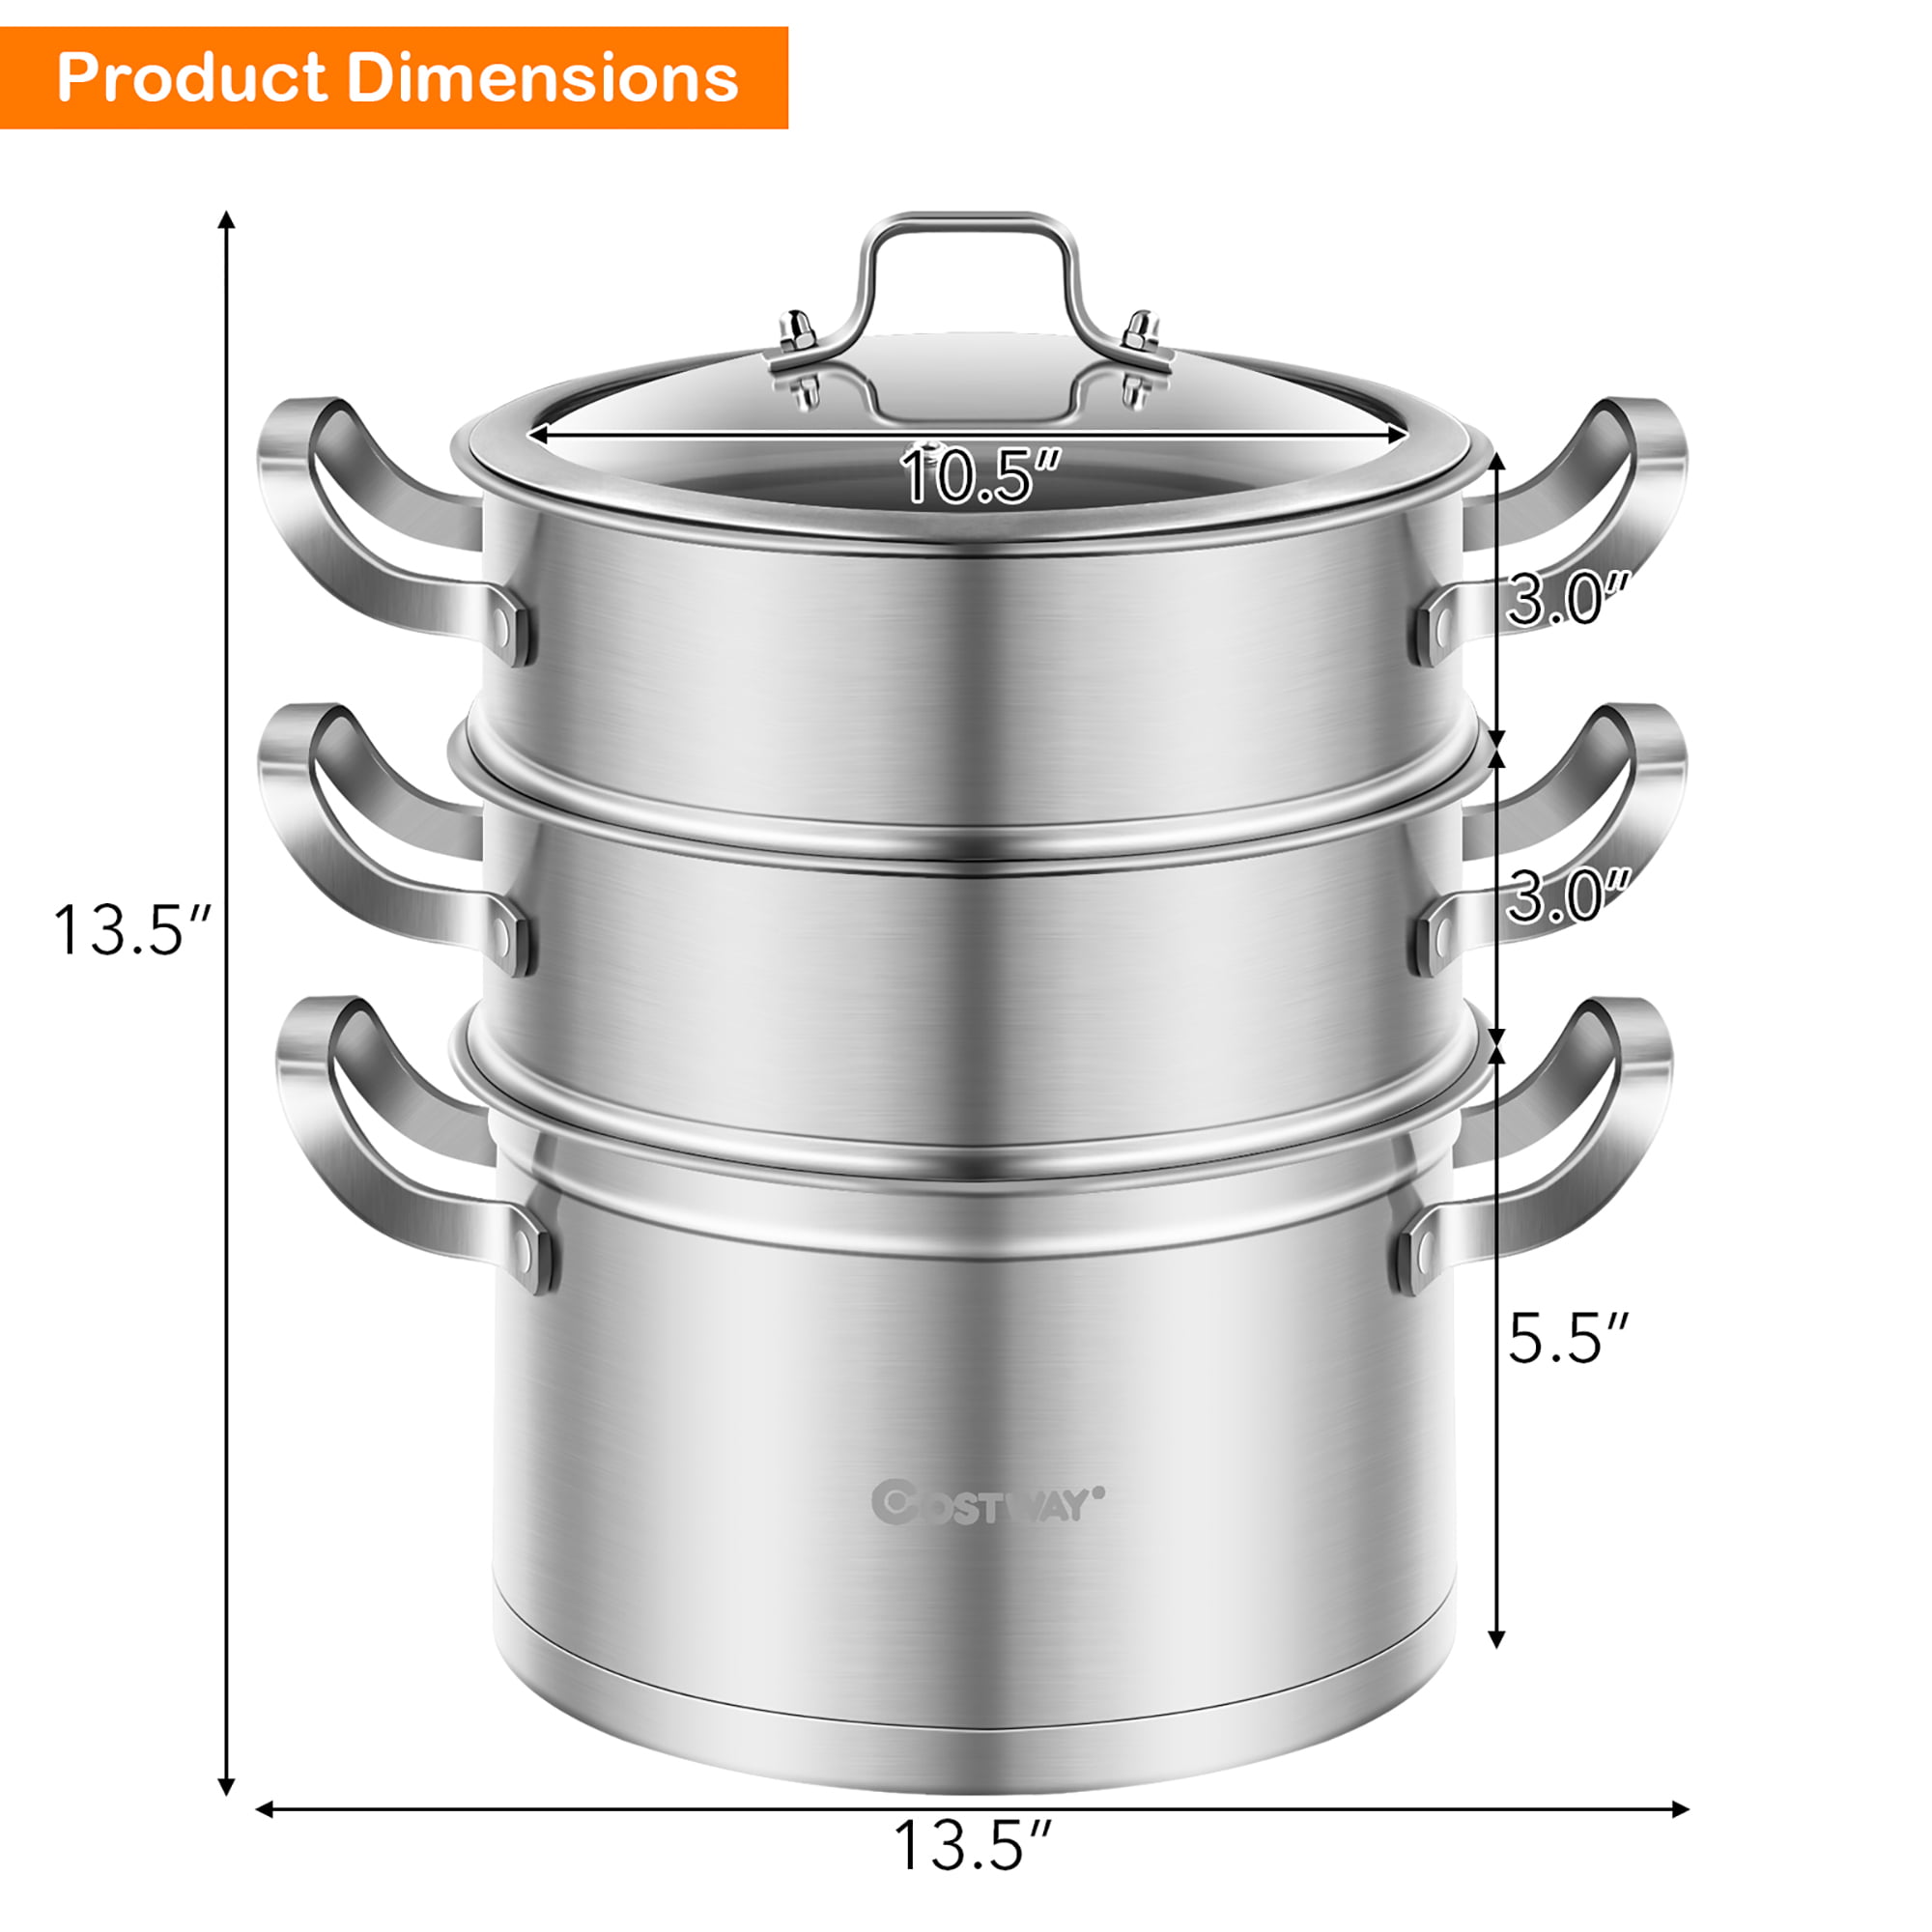 COSTWAY 2-Tier Stainless Steel Steamer, 11-Inch Multi-Layer Boiler Pot with  Handles on Both Sides, Cookware Pot with Tempered Glass Lid, Work with